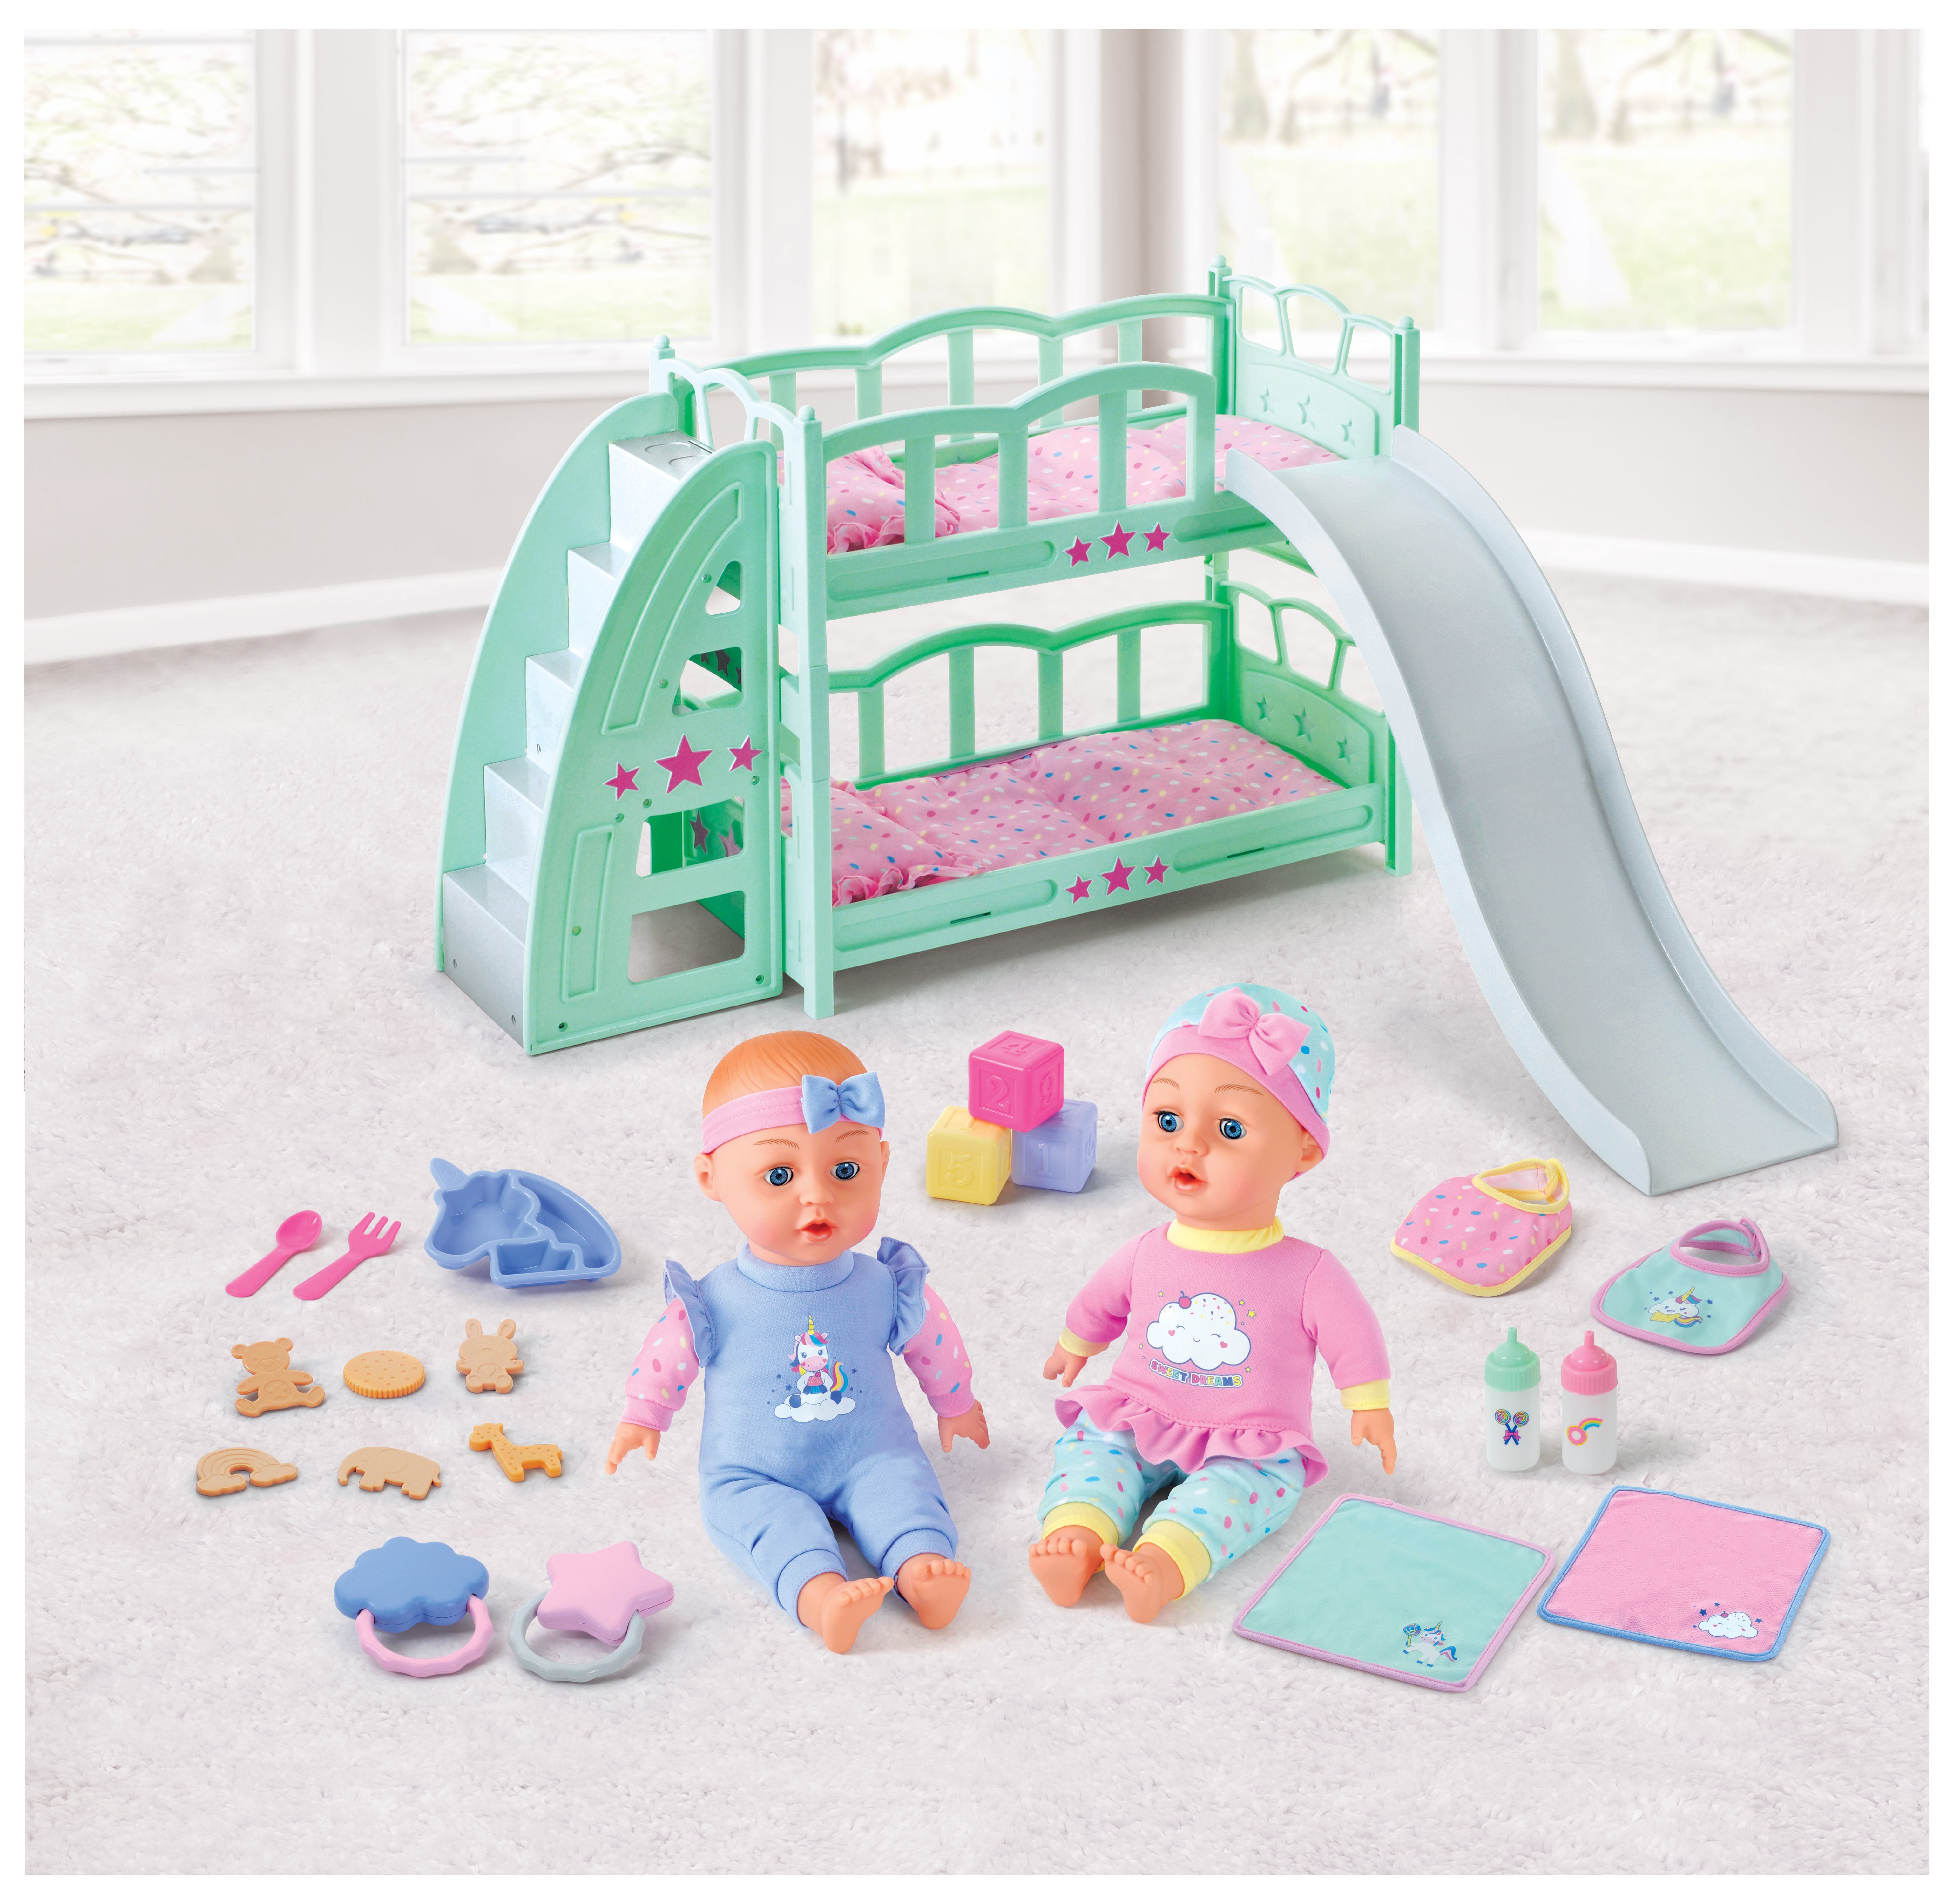 My Sweet Love Deluxe Bunk Bed Doll, Baby Alive Doll Bunk Bed